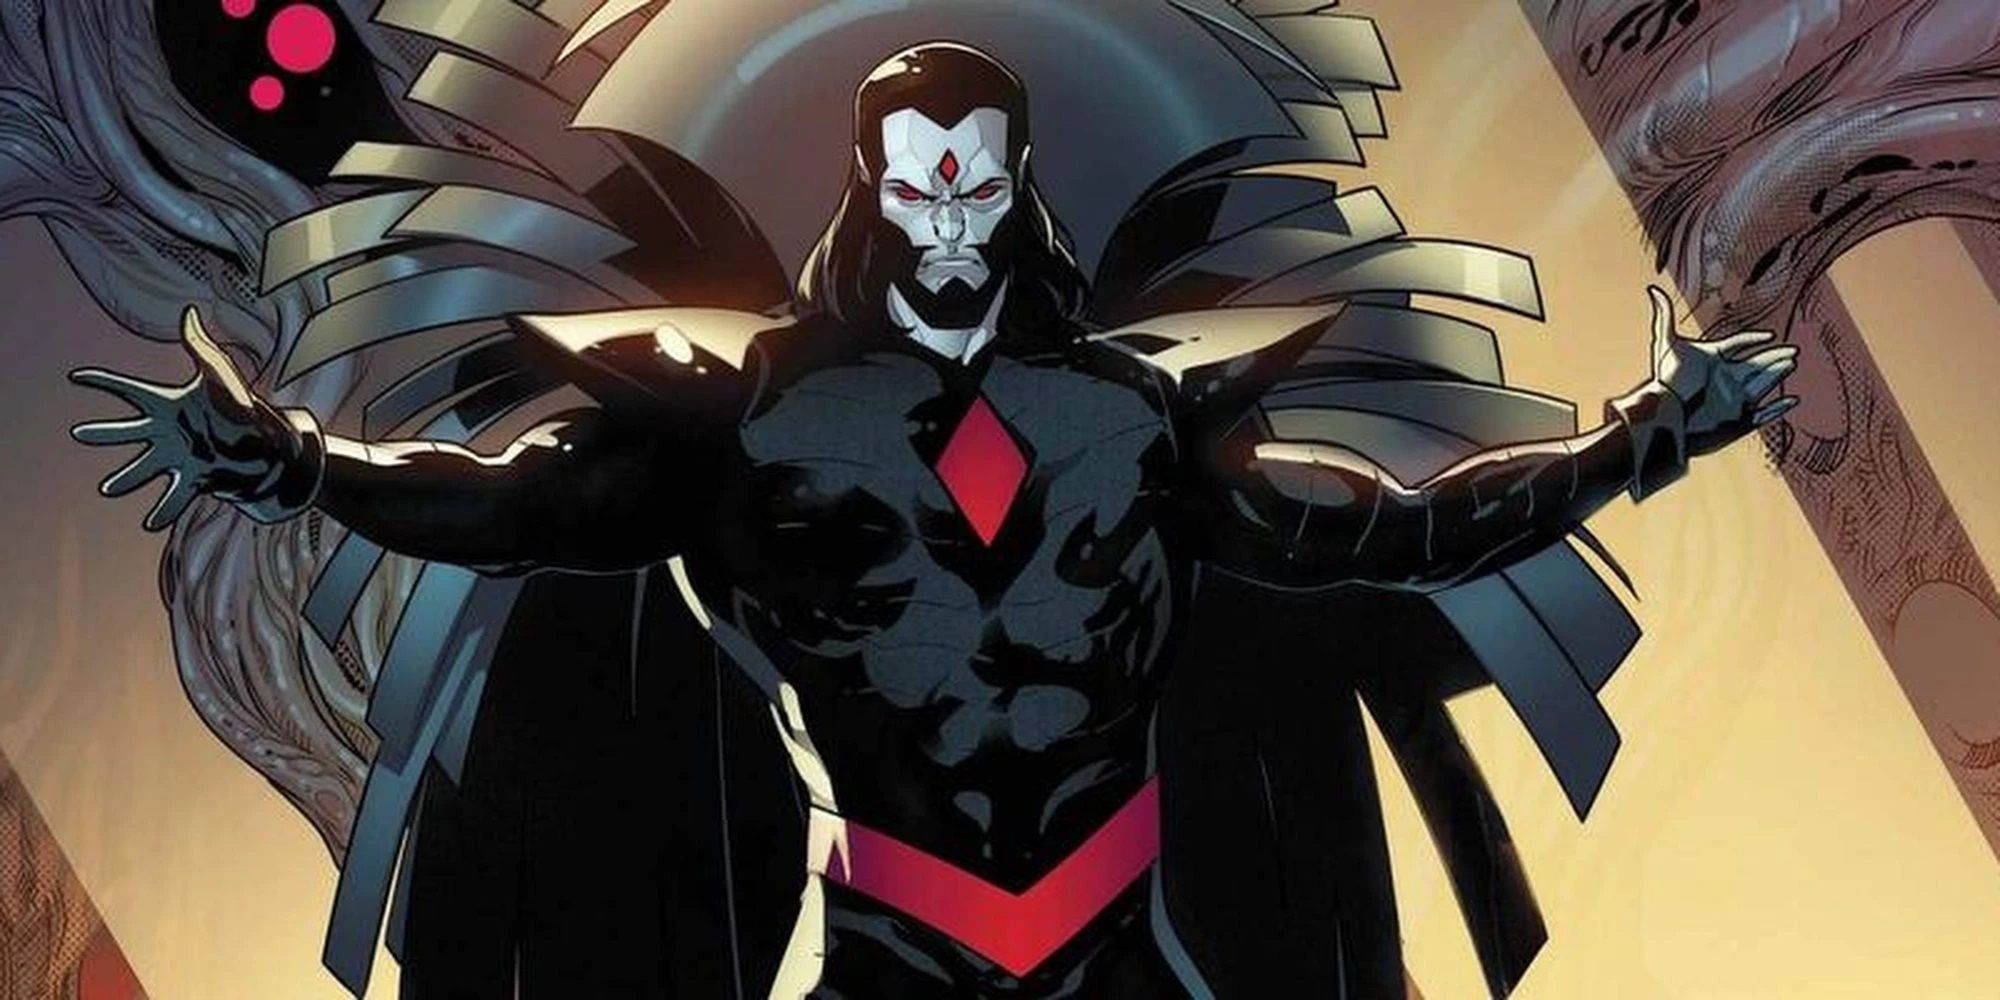 Mister Sinister holding out his arms in the pages of Marvel Comics